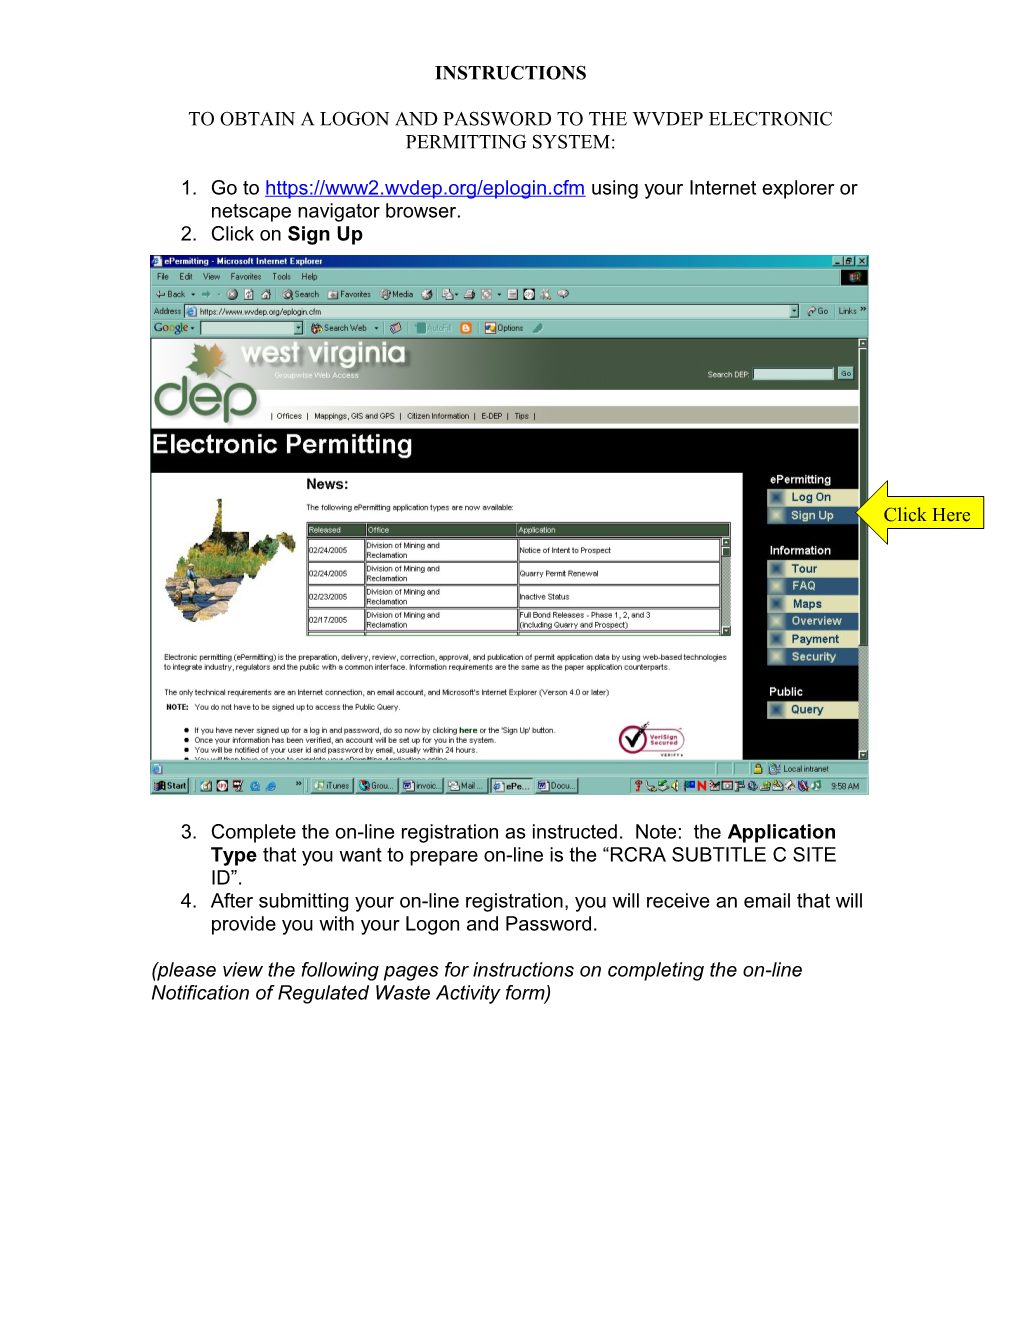 To Obtain a Logon and Password to the Wvdep Electronic Permitting System